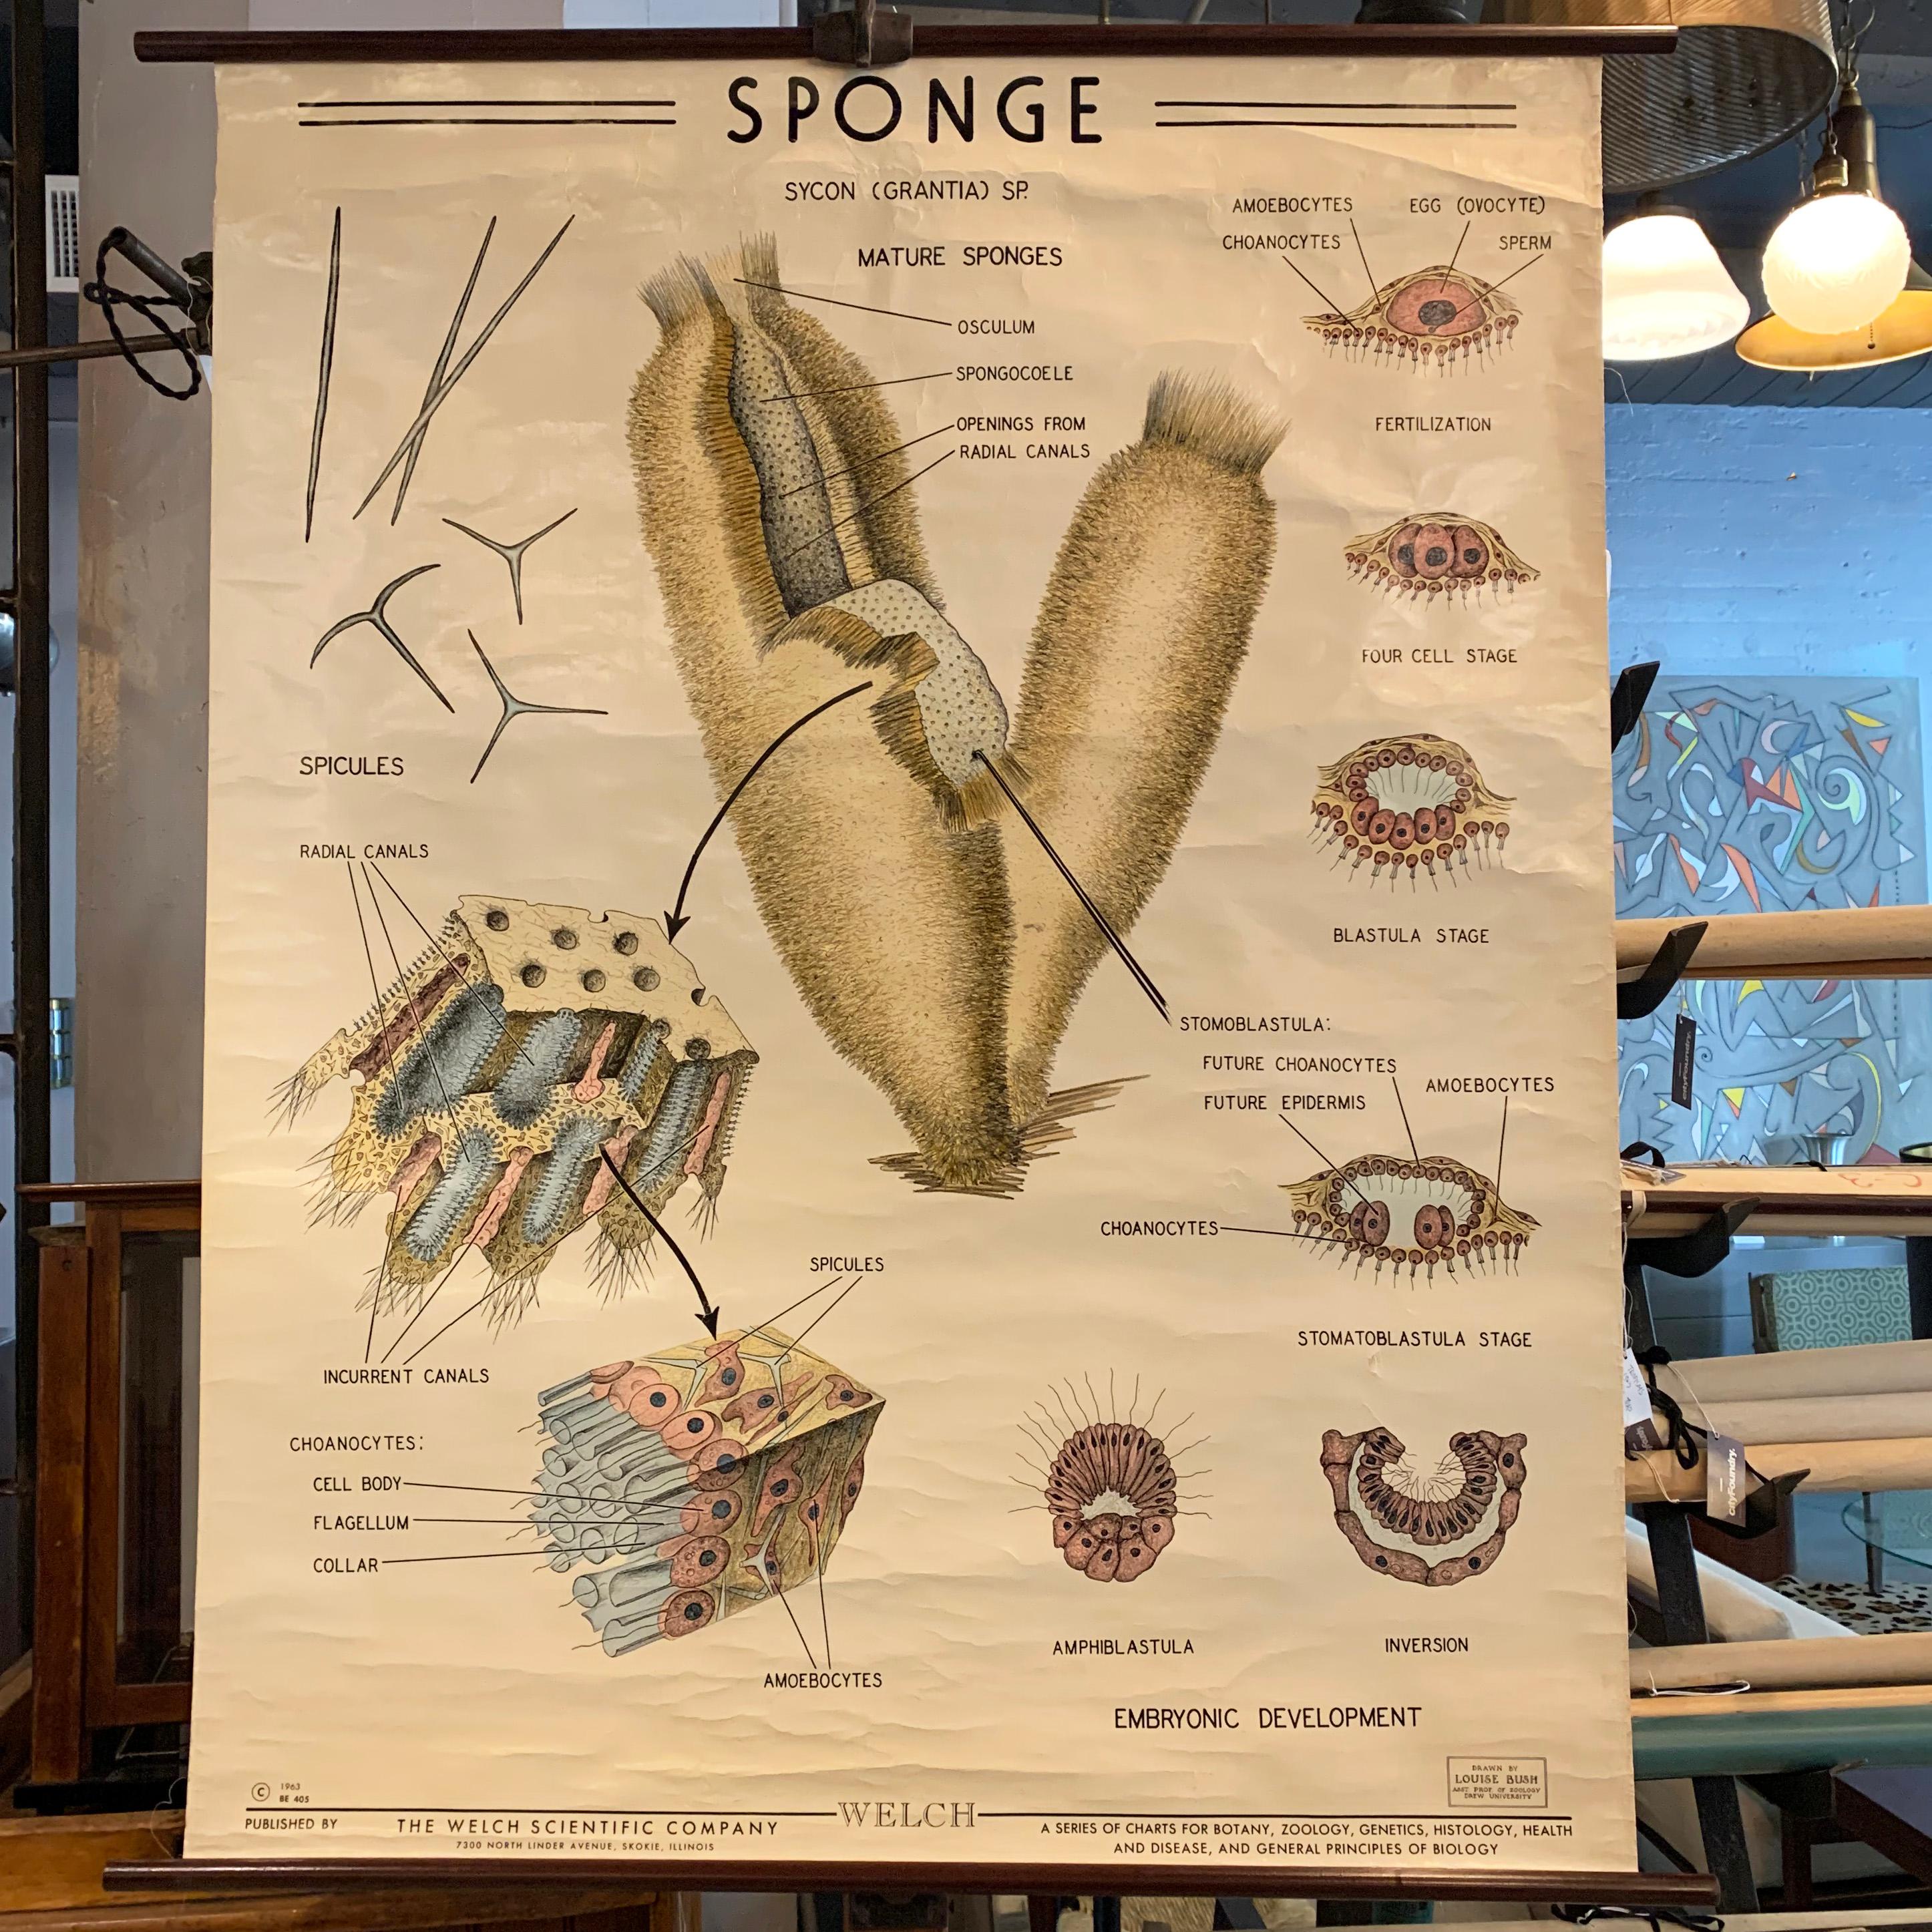 Educational, scientific, zoological, wall chart depicting the anatomy of marine sponges beautifully illustrated by Louise Bush, Assistant Professor of Zoology, Drew University for The Welch Scientific Company on fortified, coated paper with wood